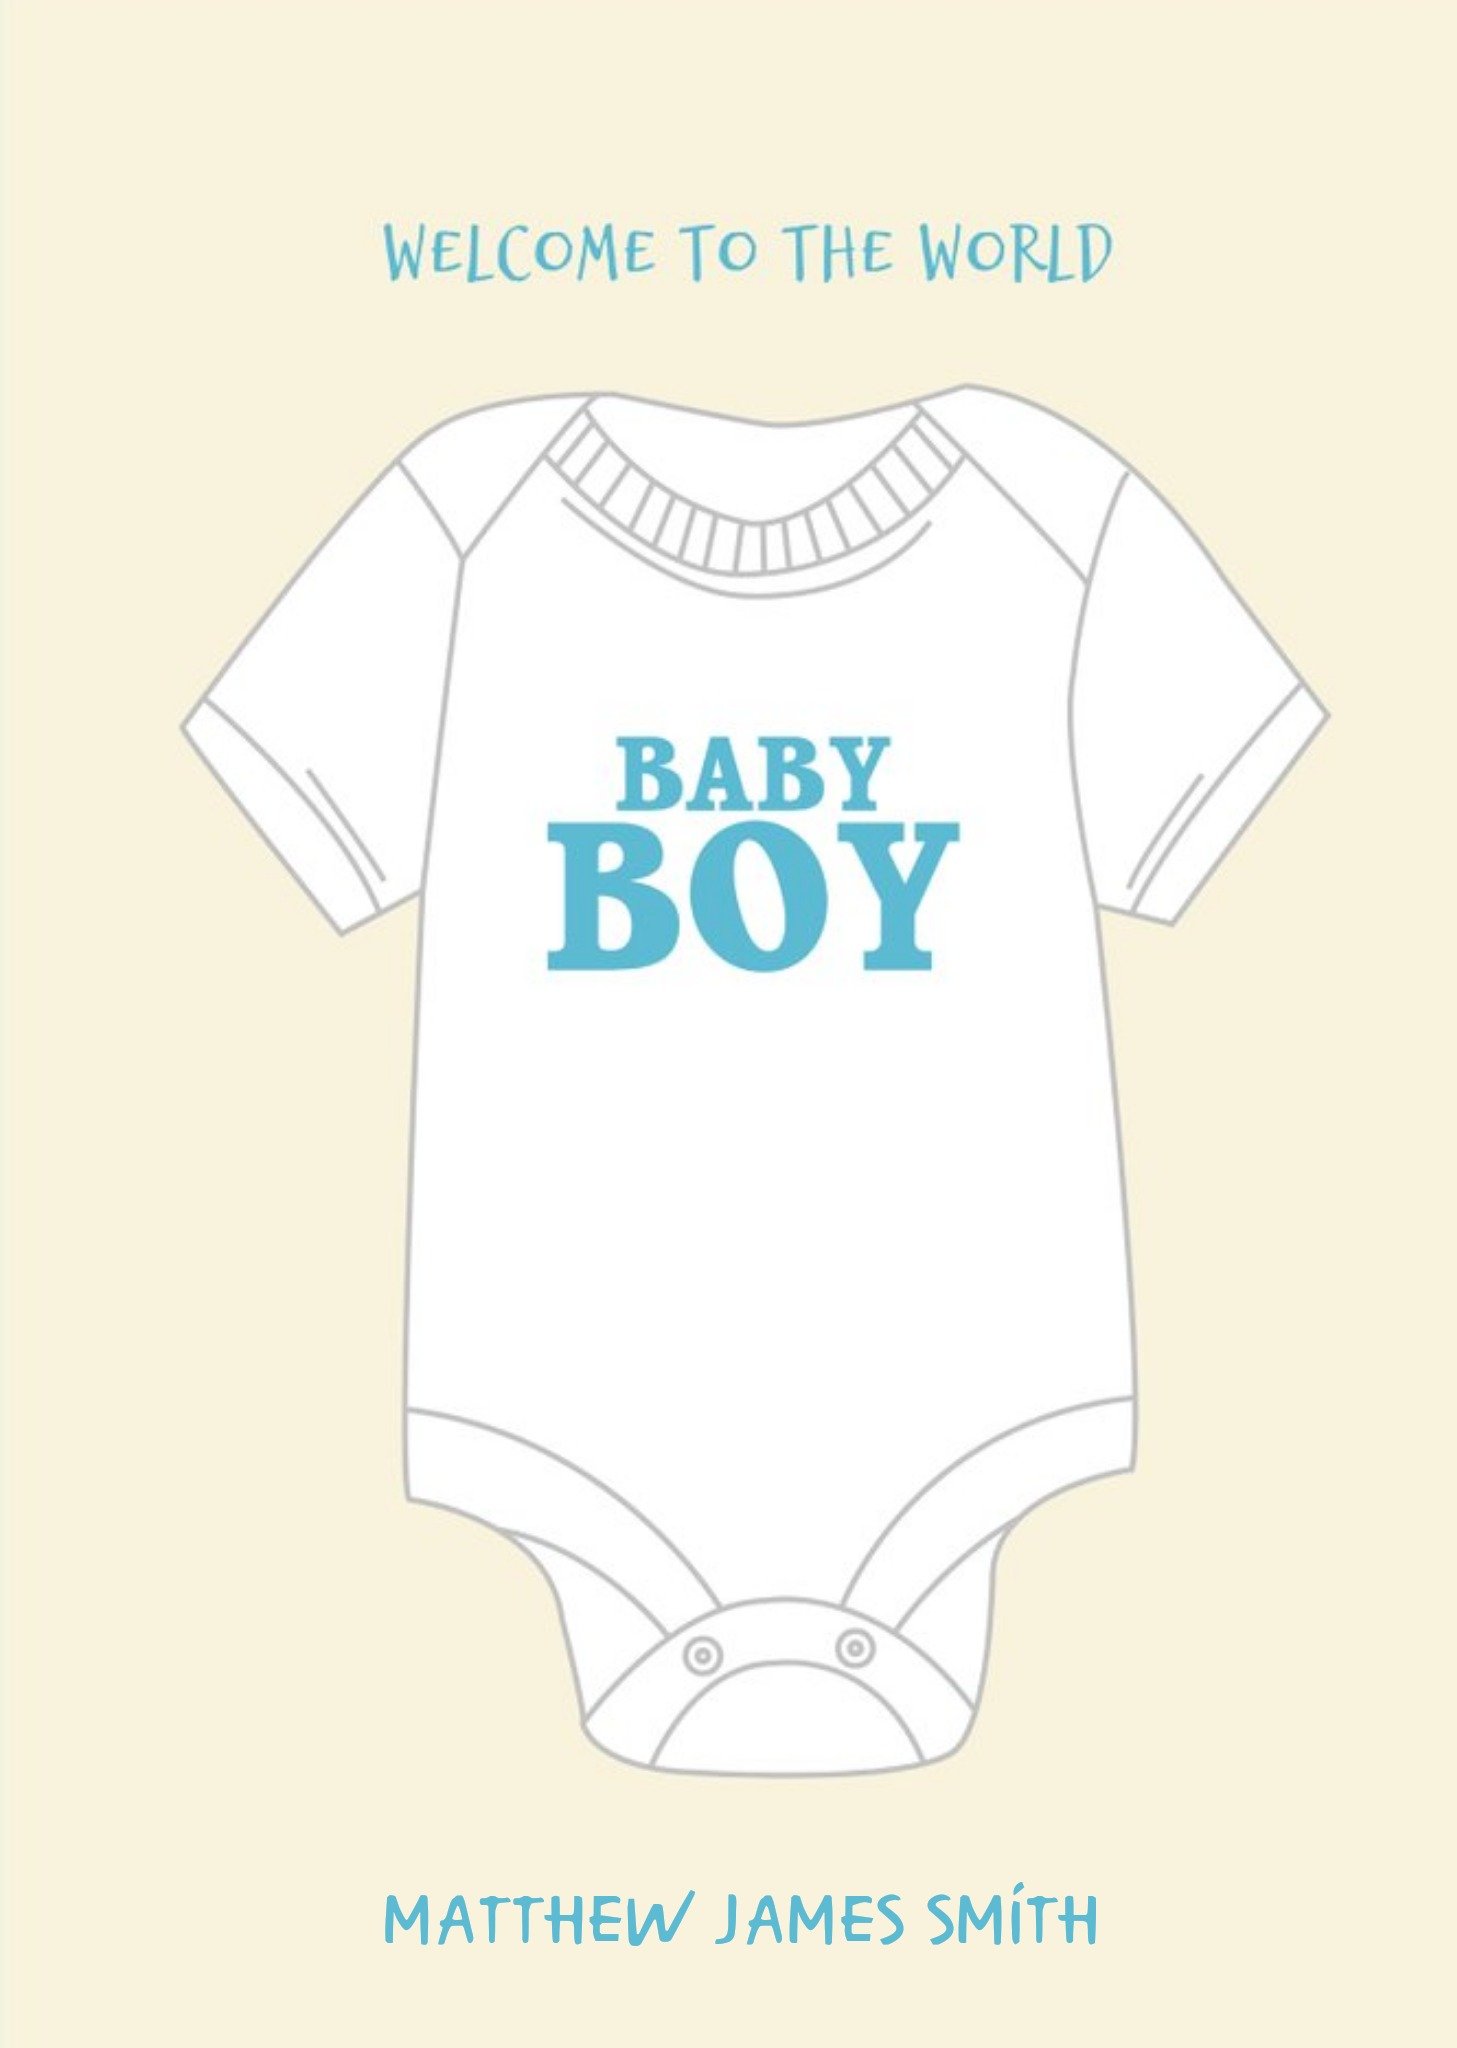 Moonpig Pearl And Ivy Illustrated Baby Grow New Baby Boy Card Ecard